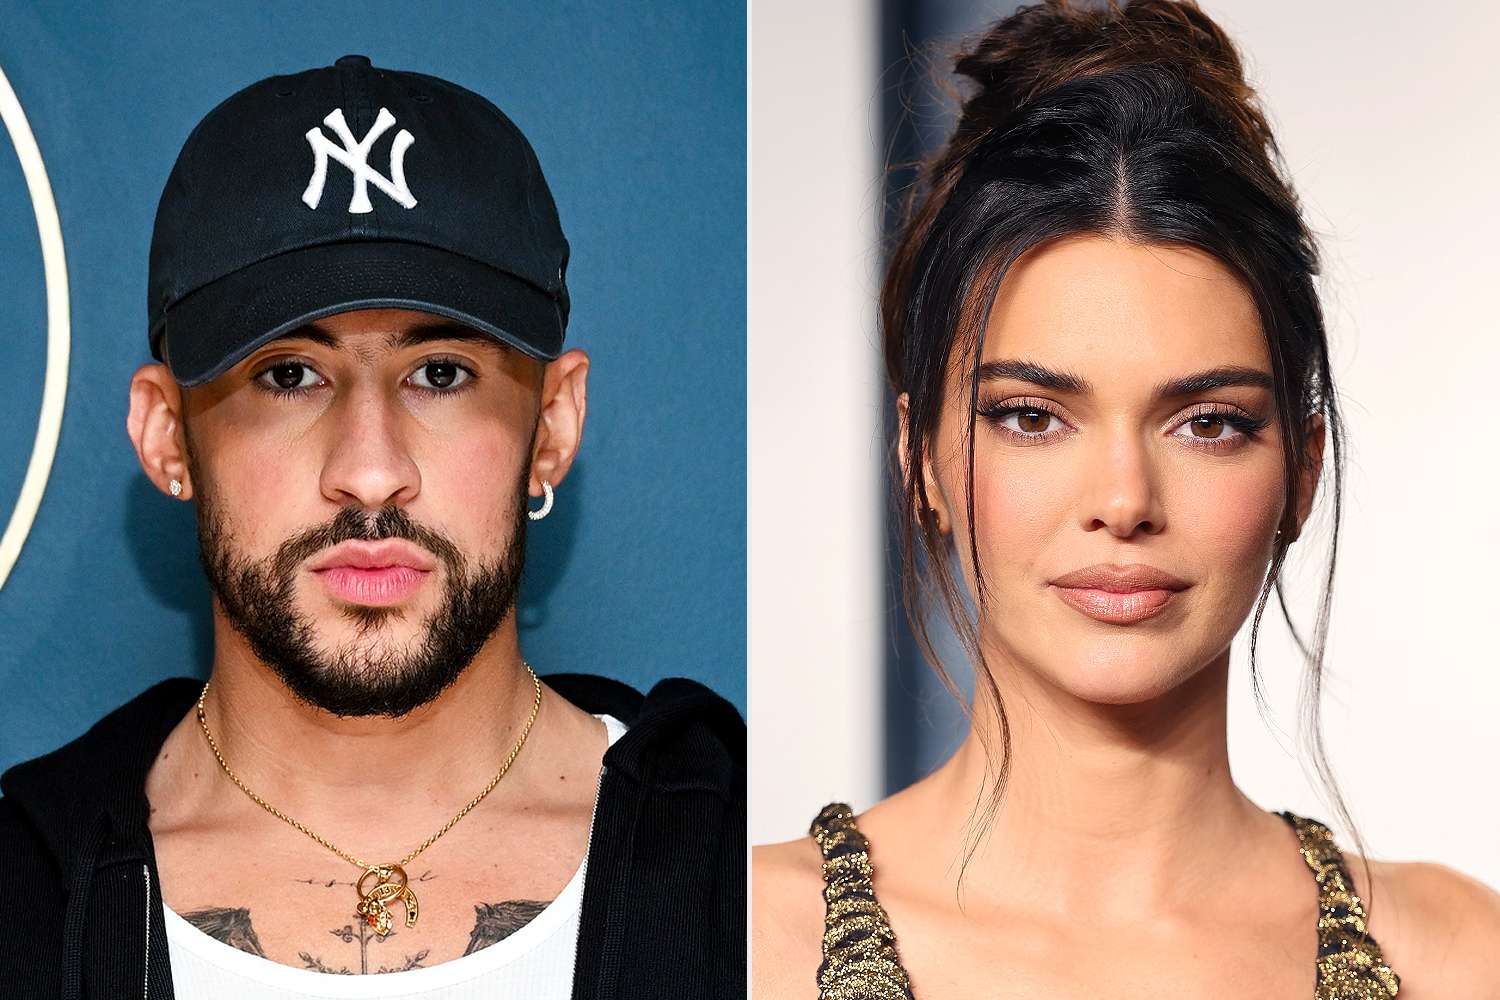 End of a Chapter: Kendall Jenner and Bad Bunny Part Ways Following a Relationship of Less Than One Year